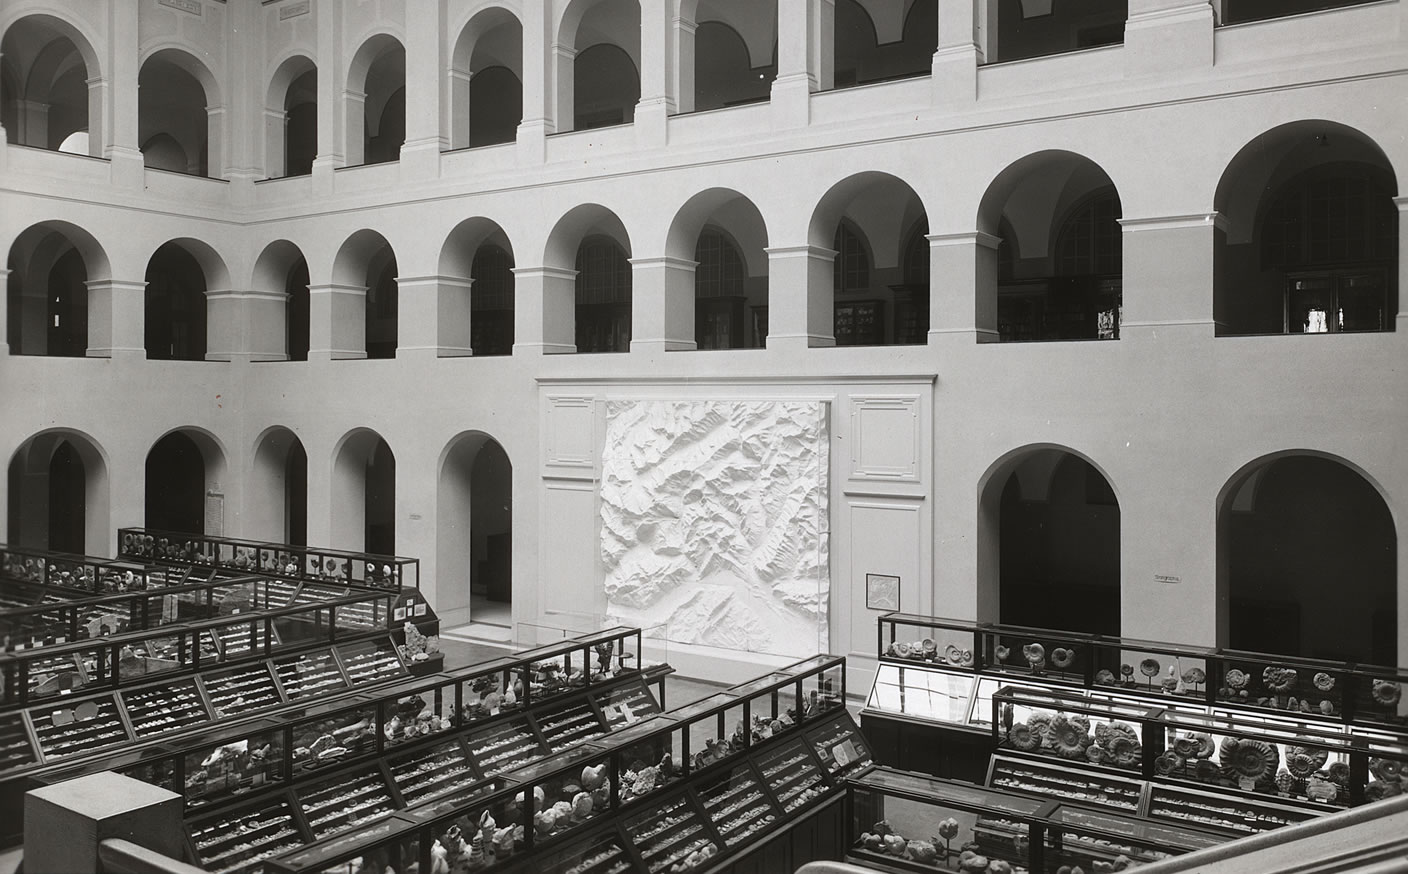 Enlarged view: The original exhibition in the quadrangle of the NO building in 1925. Image: Image Archive, ETH Library